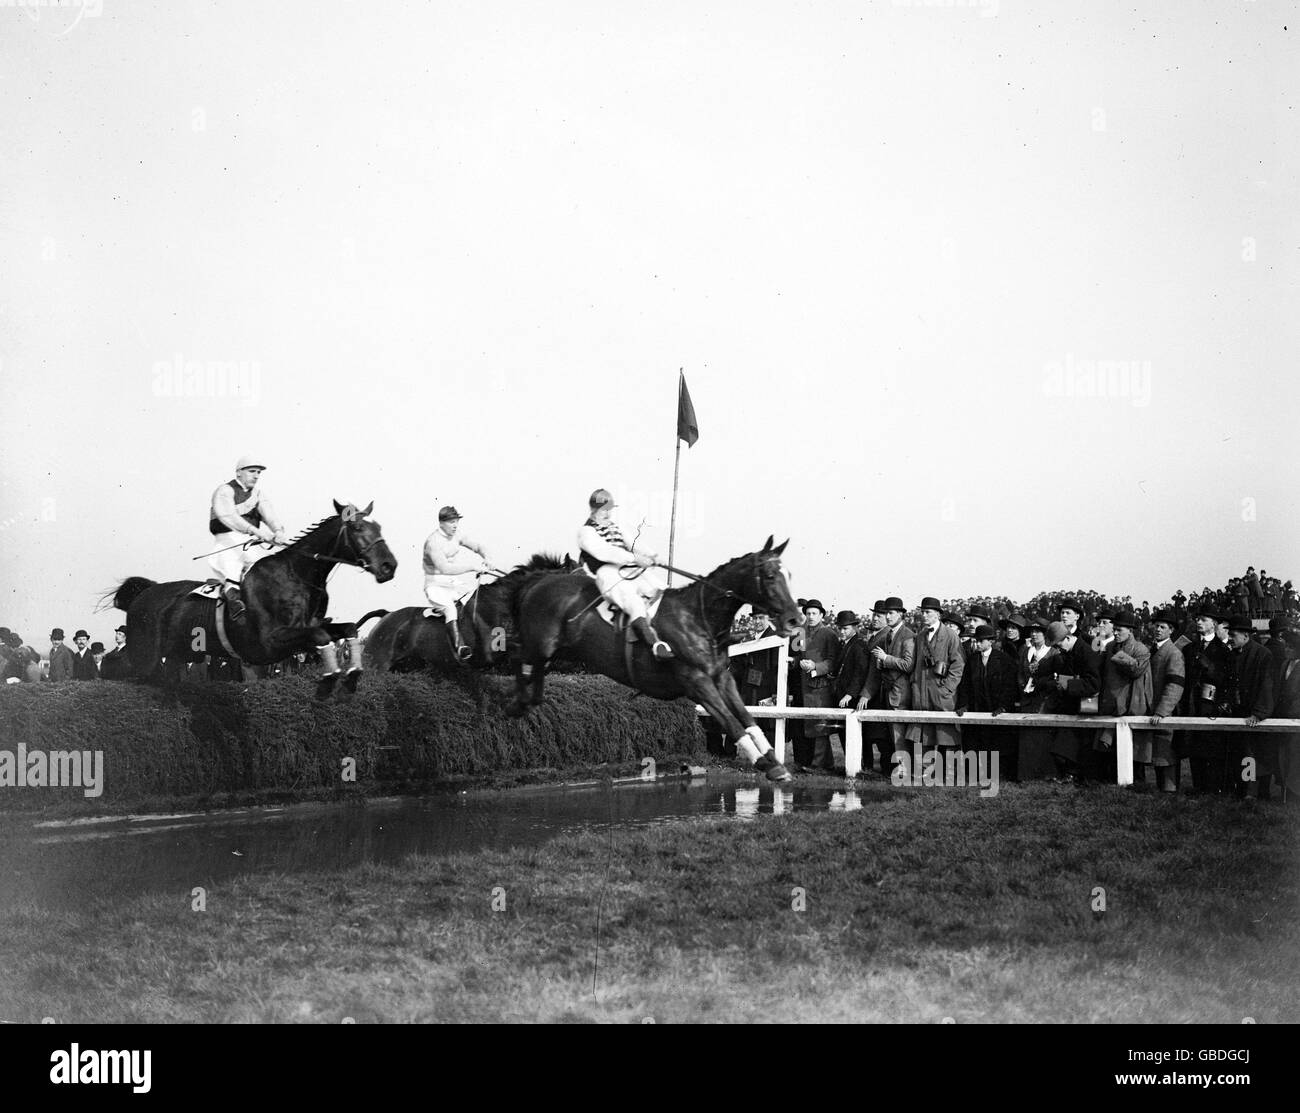 The water jump during The Grand National at Aintree Racecourse in 1914. Stock Photo